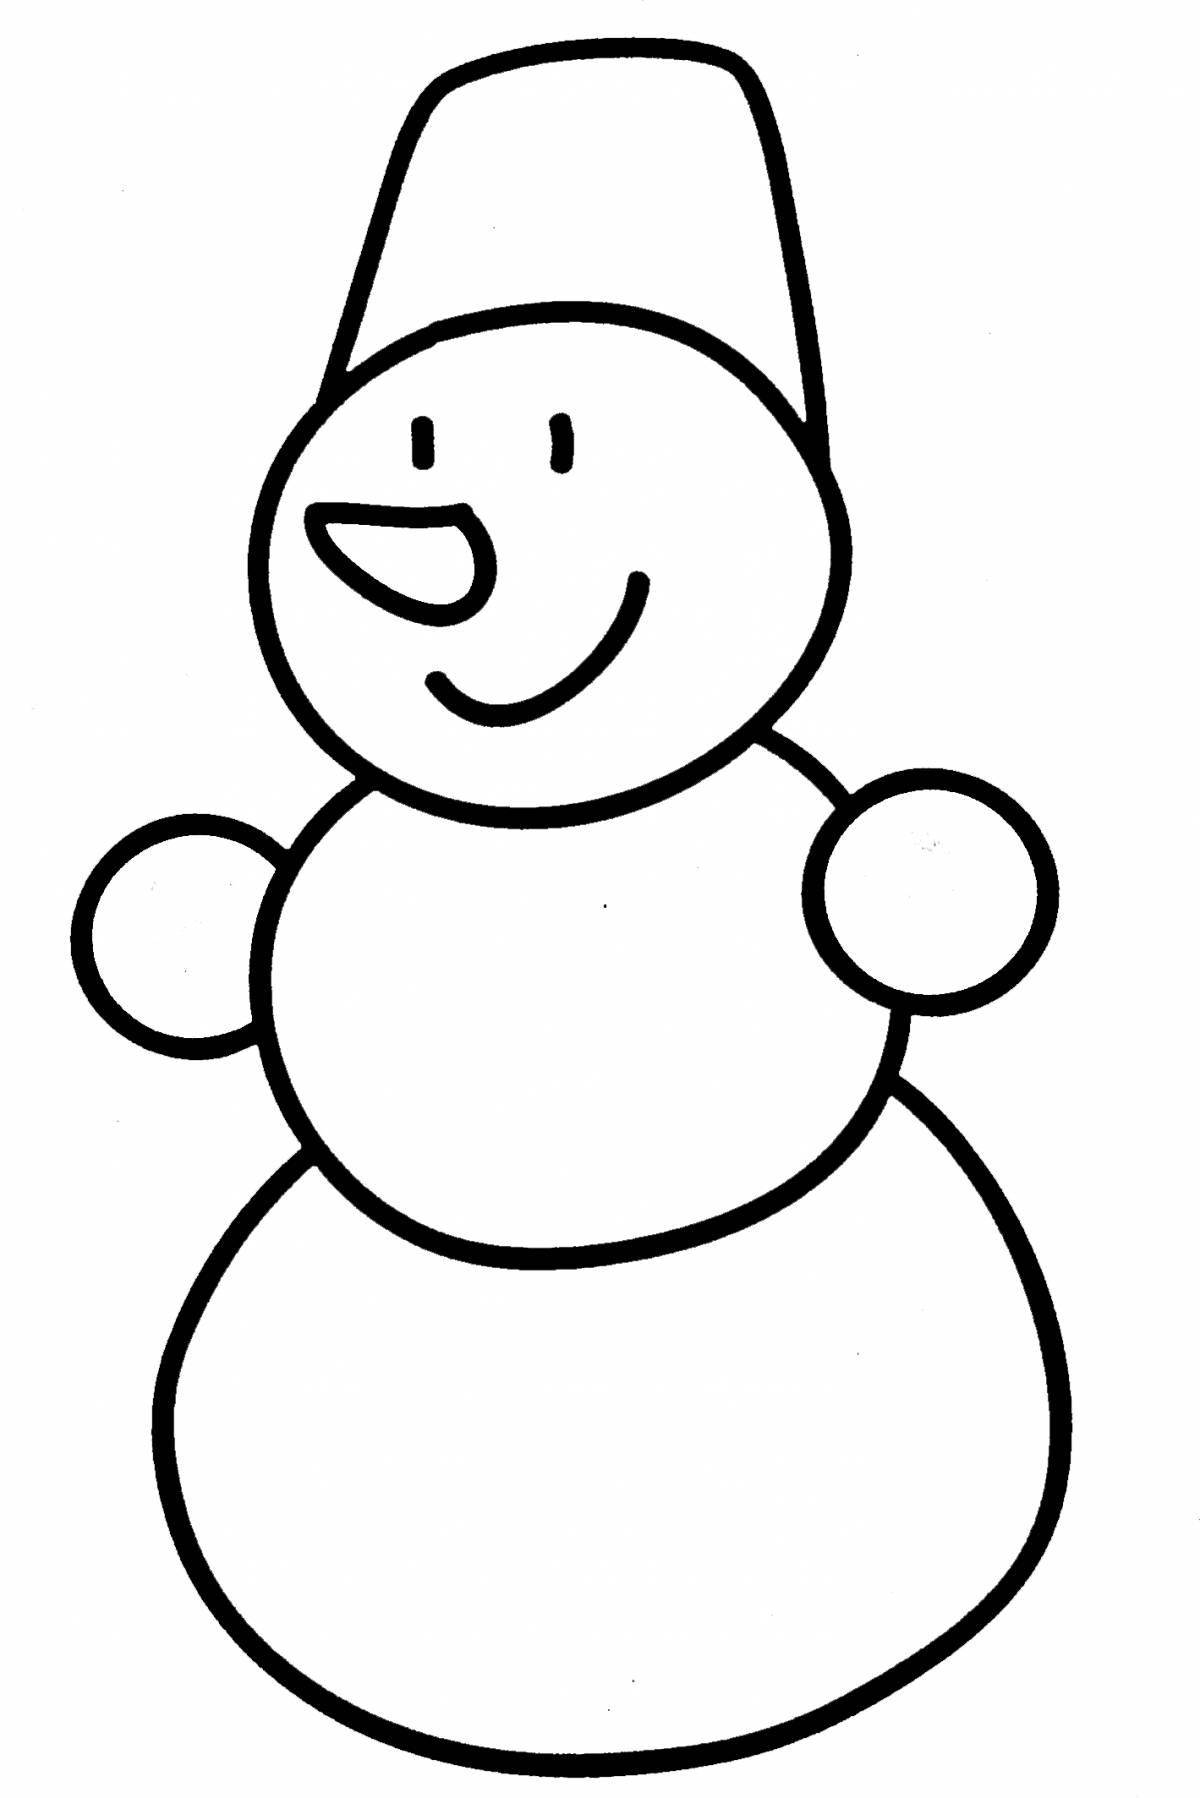 Bright drawing of a snowman